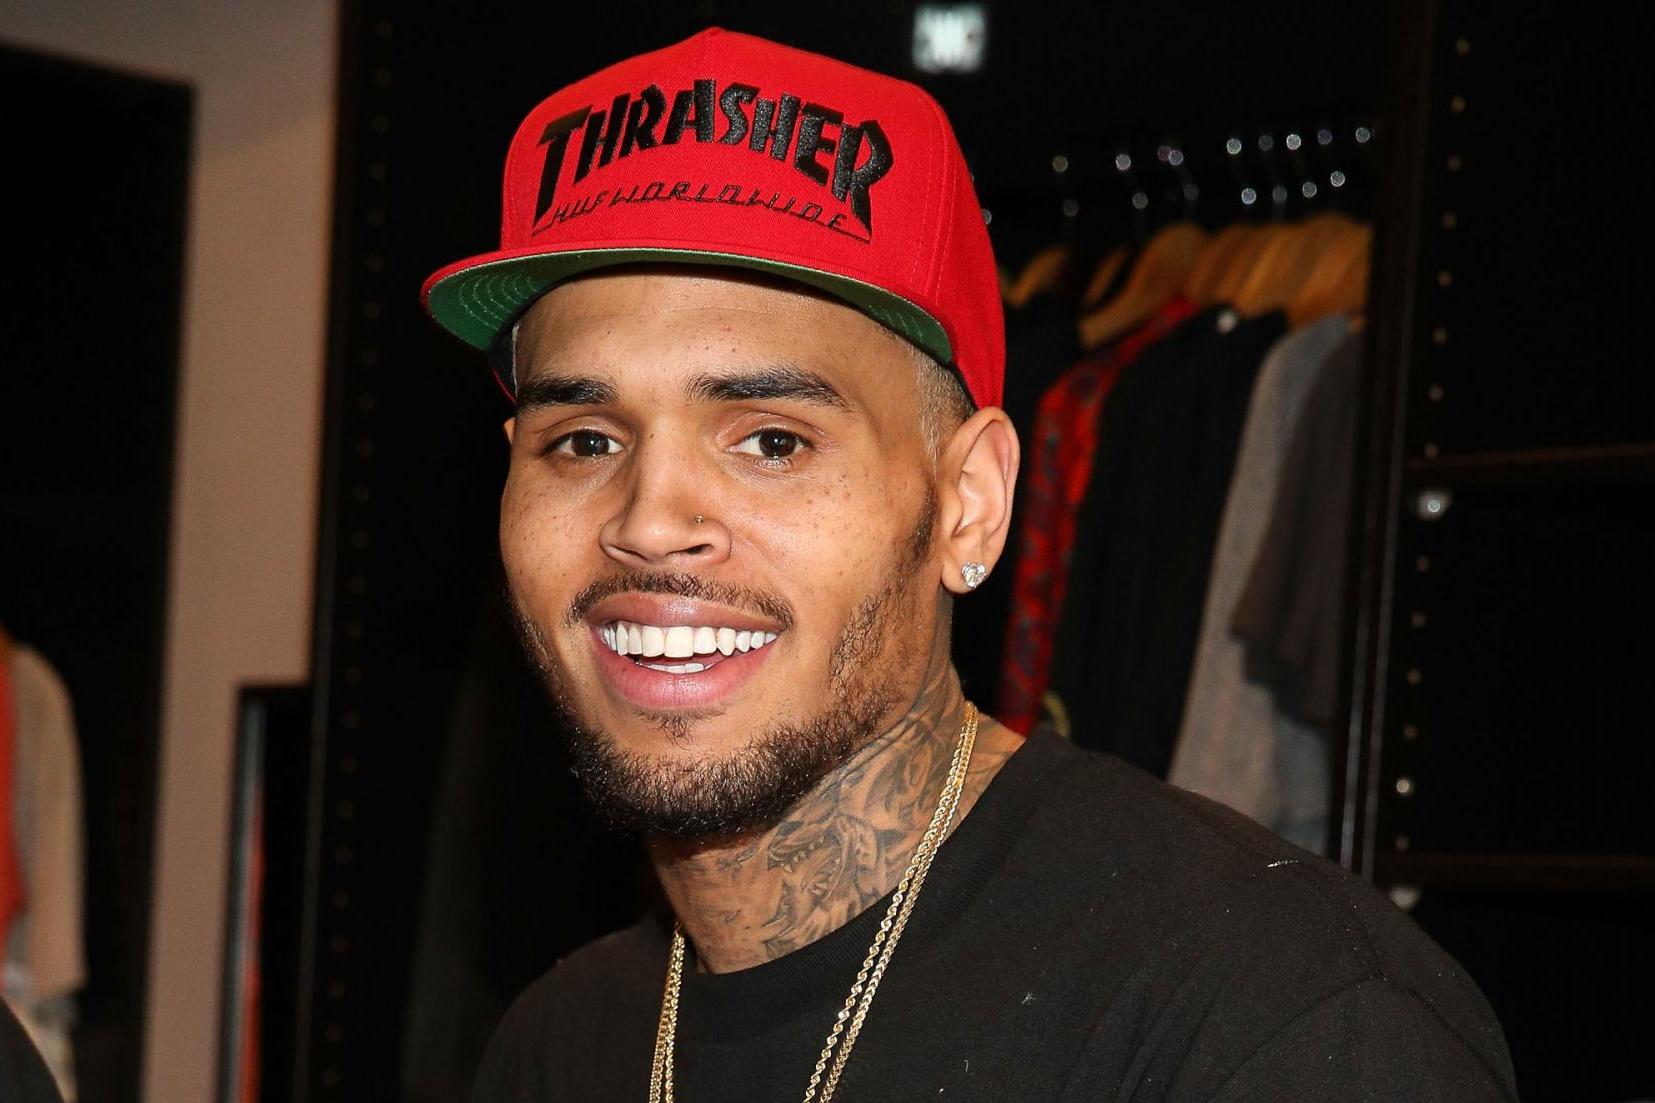 Chris Brown skips Paris court hearing over rape accusations The